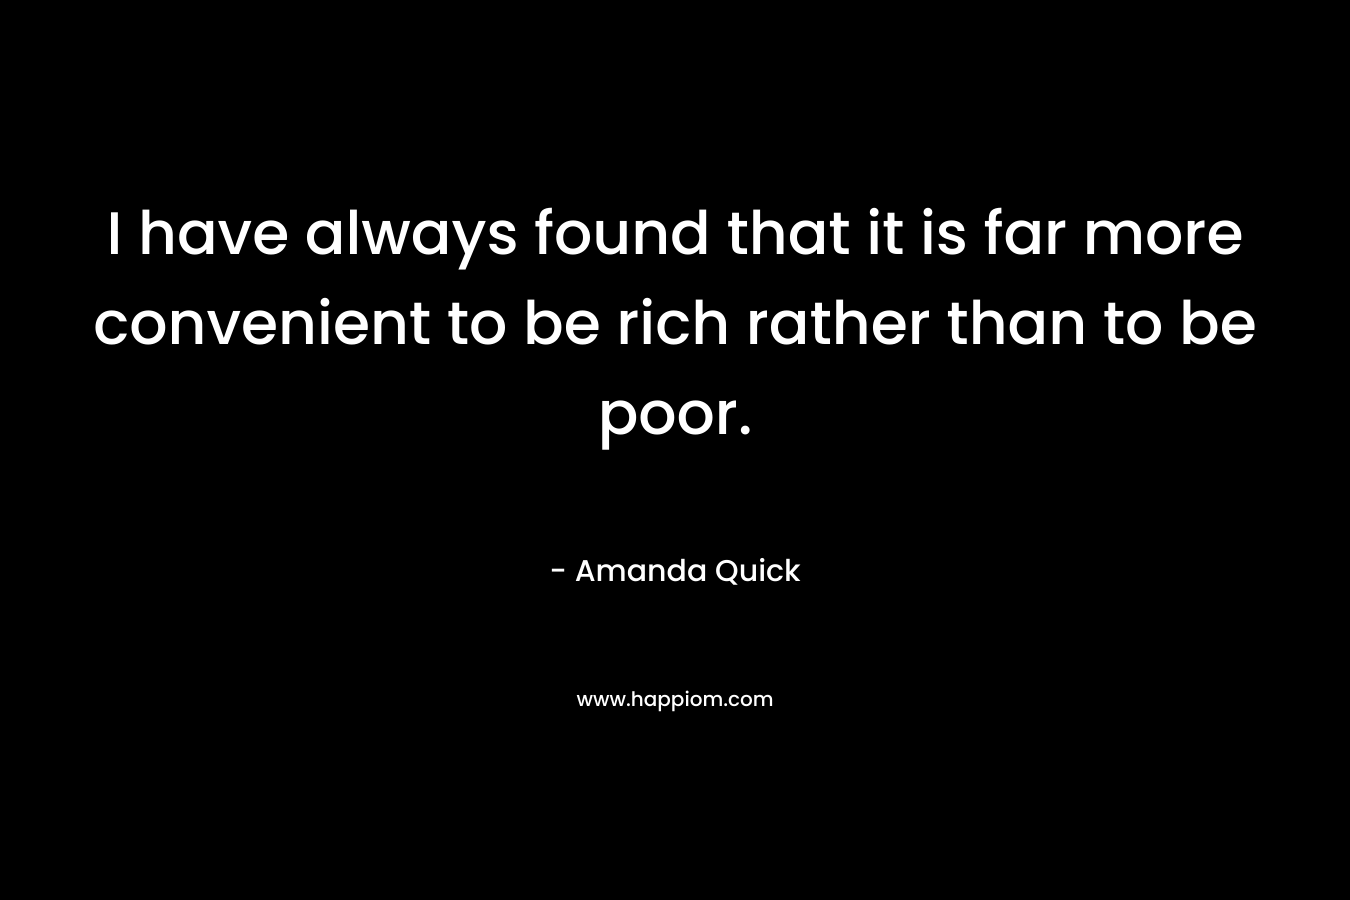 I have always found that it is far more convenient to be rich rather than to be poor. – Amanda Quick